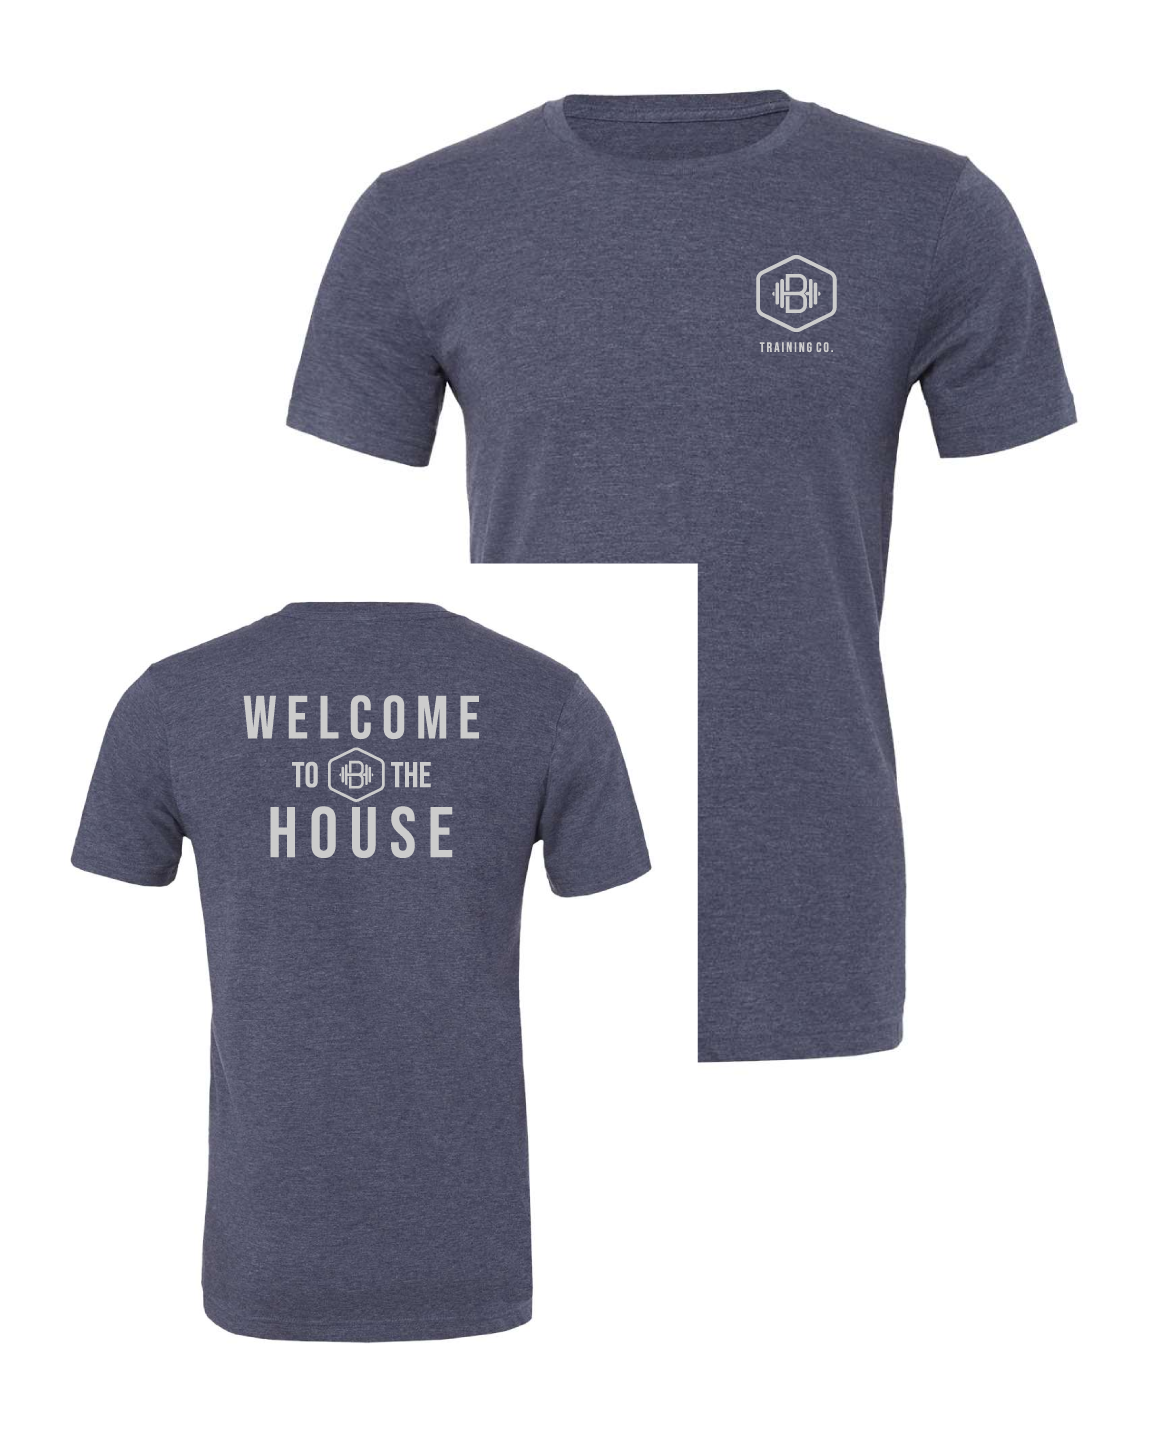 Bell House - WELCOME Unisex Premium T-Shirt